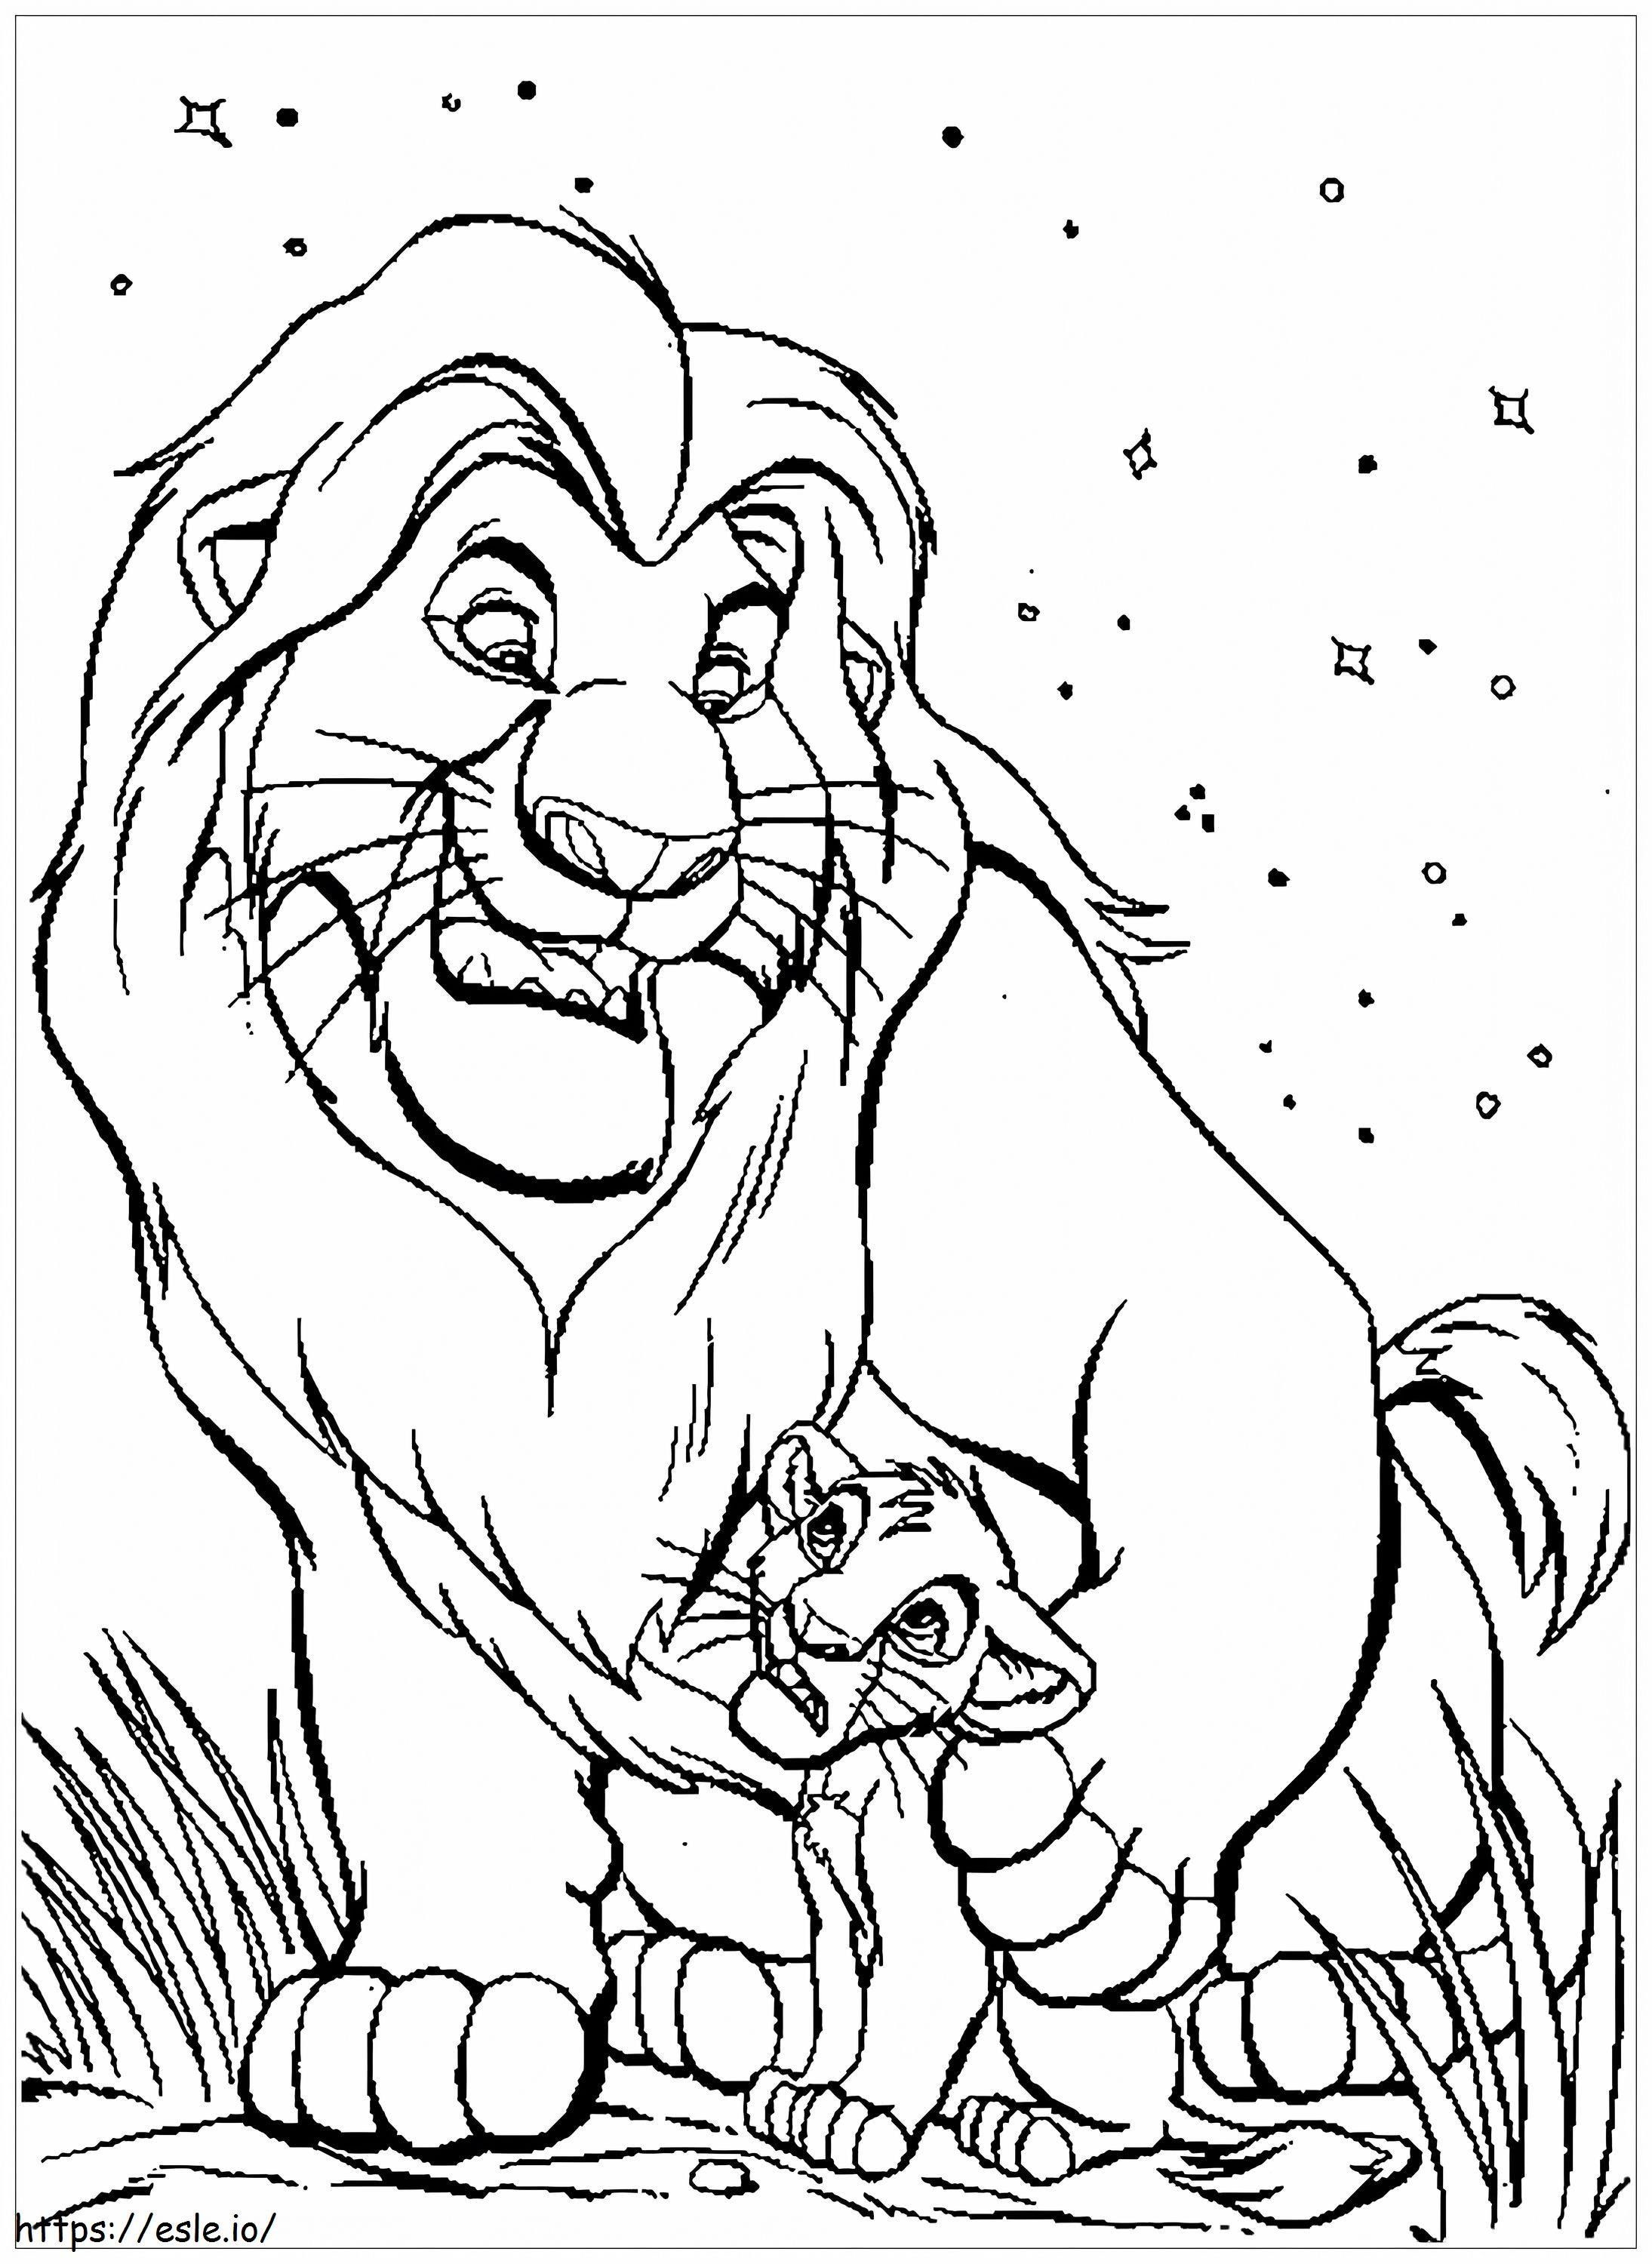 Mufasa With Simba coloring page